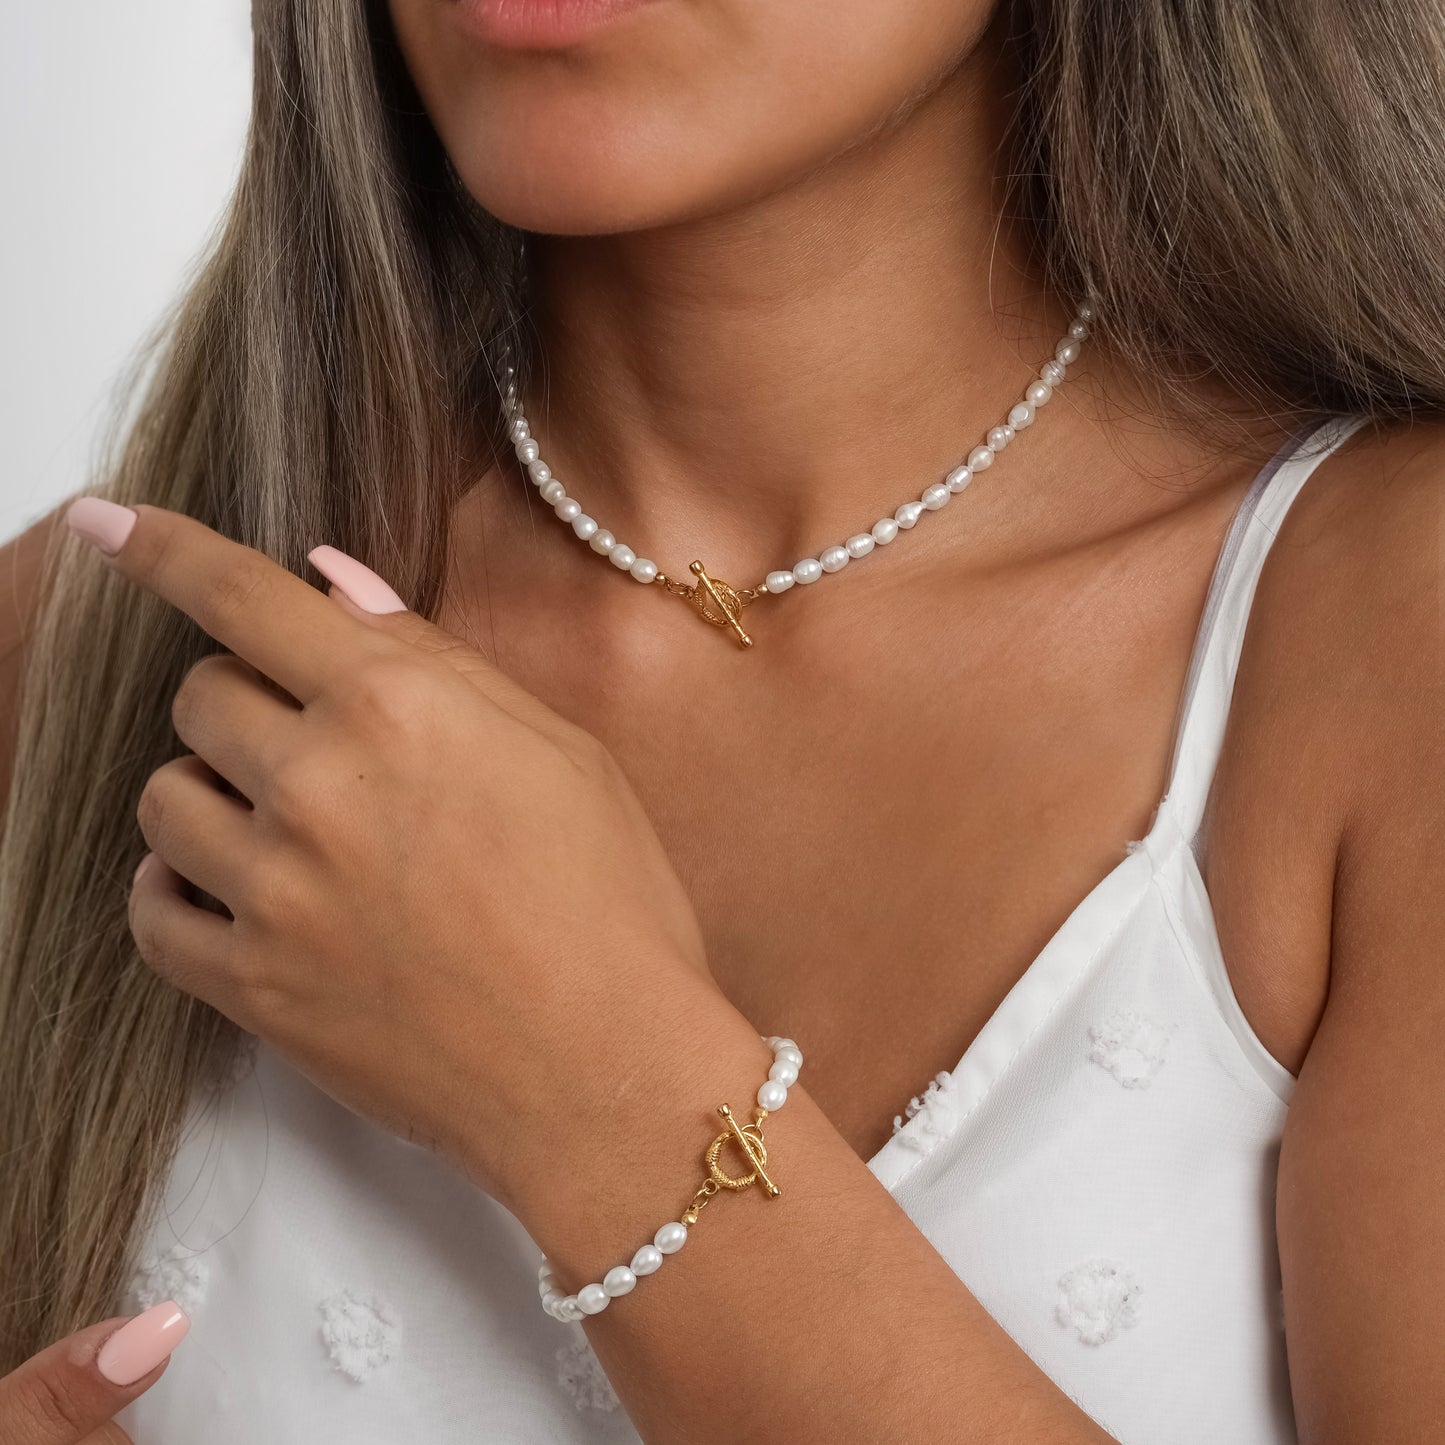 A model in a white dress wearing Toggle Clasp Pearl Choker Necklace paired with Toggle Clasp Pearl Bracelet on her wrist